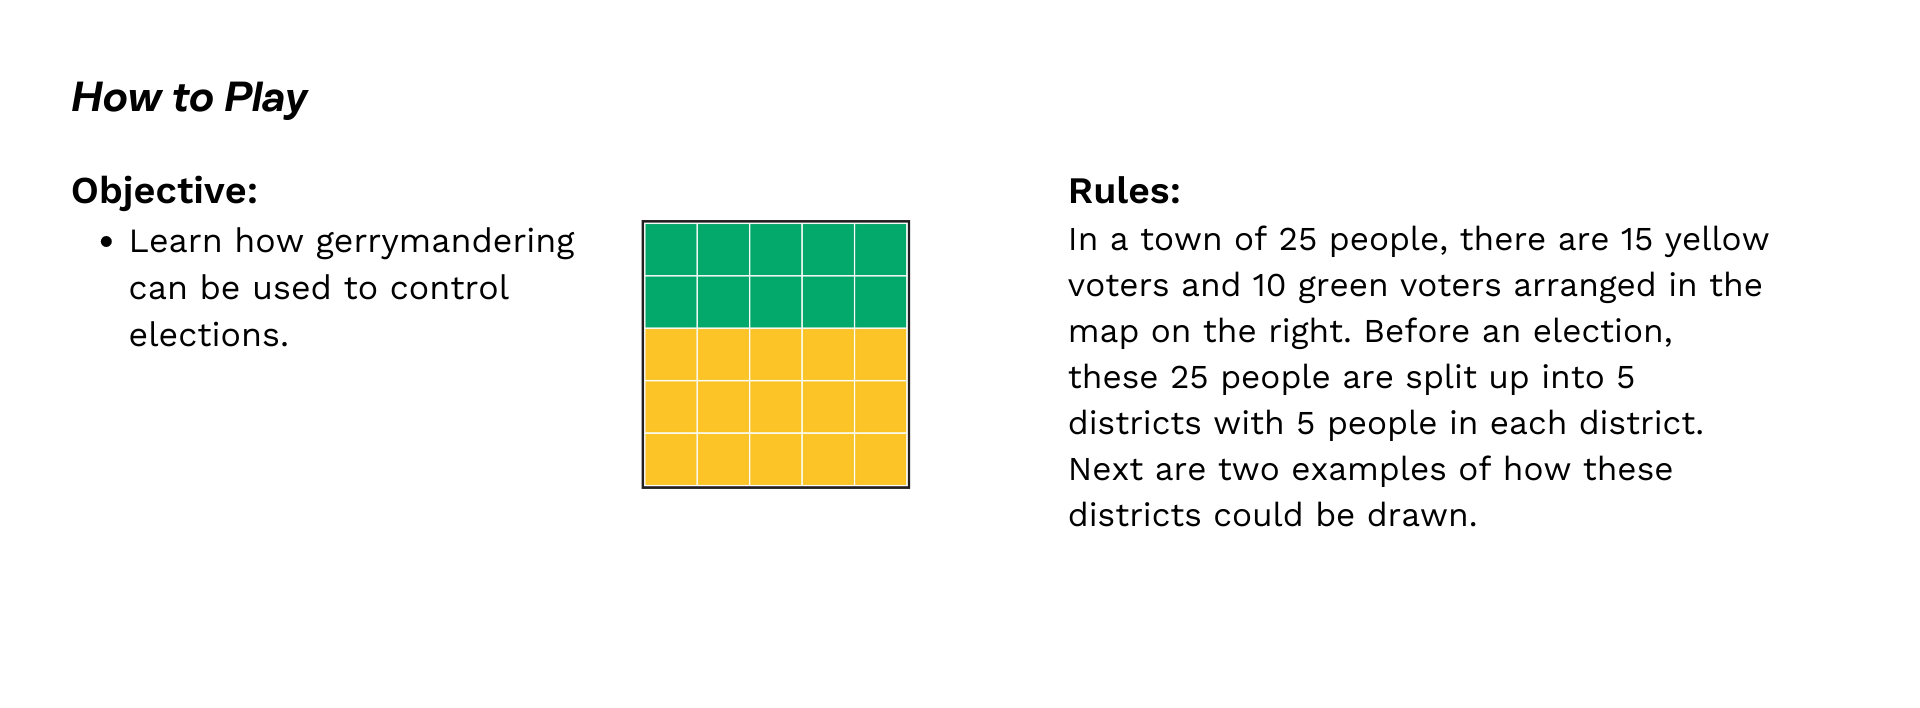 In a town of 25 people, there are 15 yellow voters and 10 green voters arranged in the map on the right. Before an election, these 25 people are split up into 5 districts with 5 people in each district.